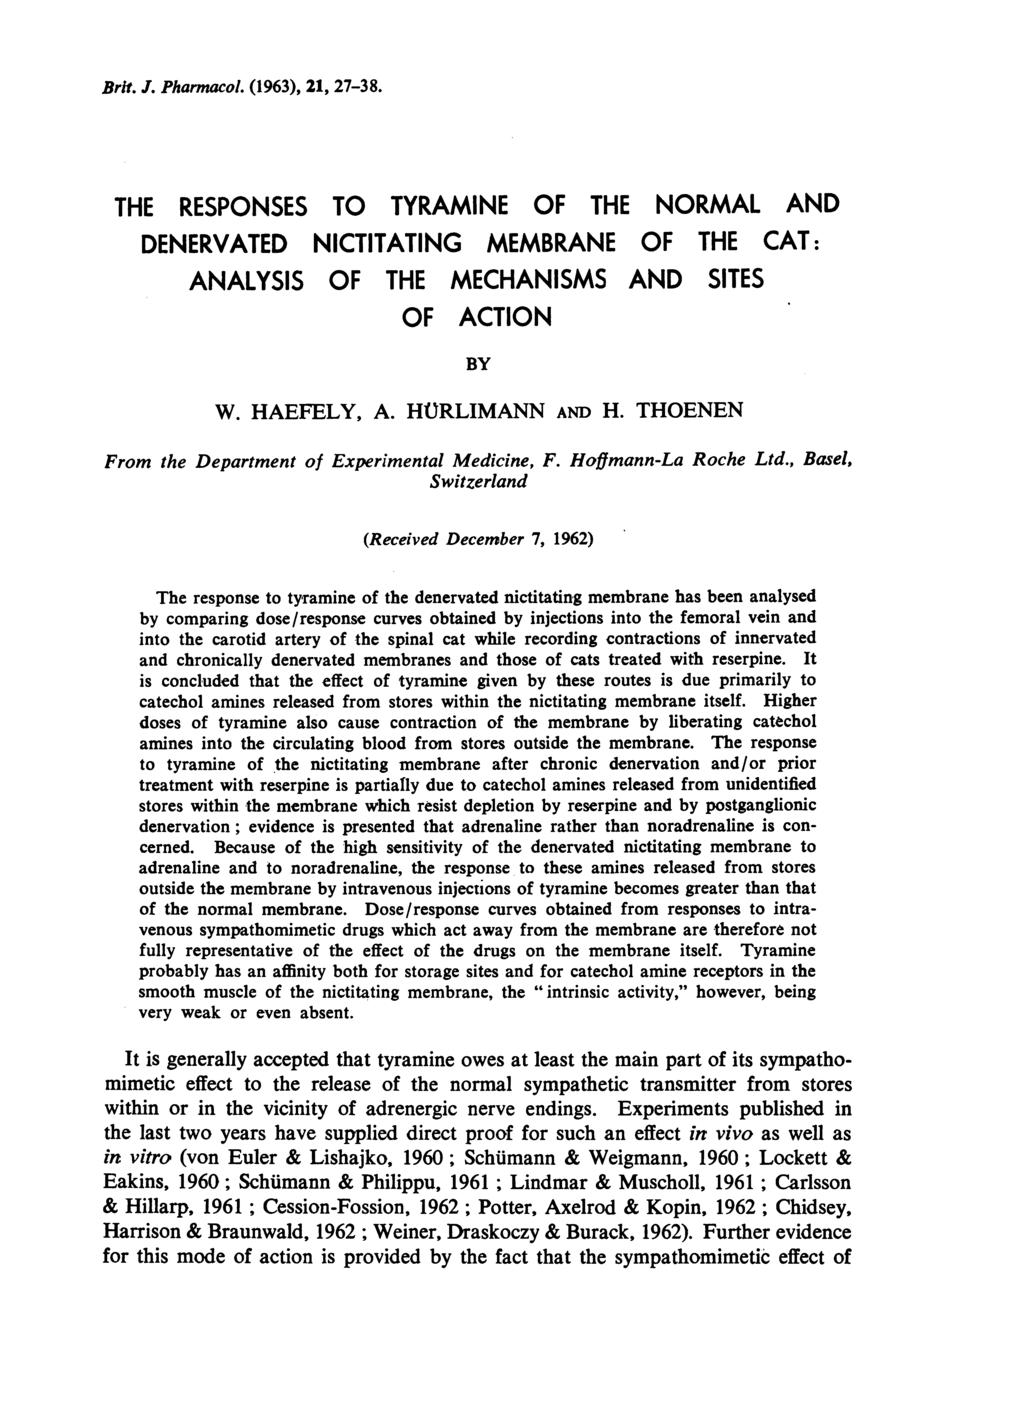 Brit. J. Pharmacol. (1963), 21, 27-38. THE RESPONSES TO TYRAMINE OF THE NORMAL AND DENERVATED NICTITATING MEMBRANE OF THE CAT: ANALYSIS OF THE MECHANISMS AND SITES OF ACTION BY W. HAEFELY, A.